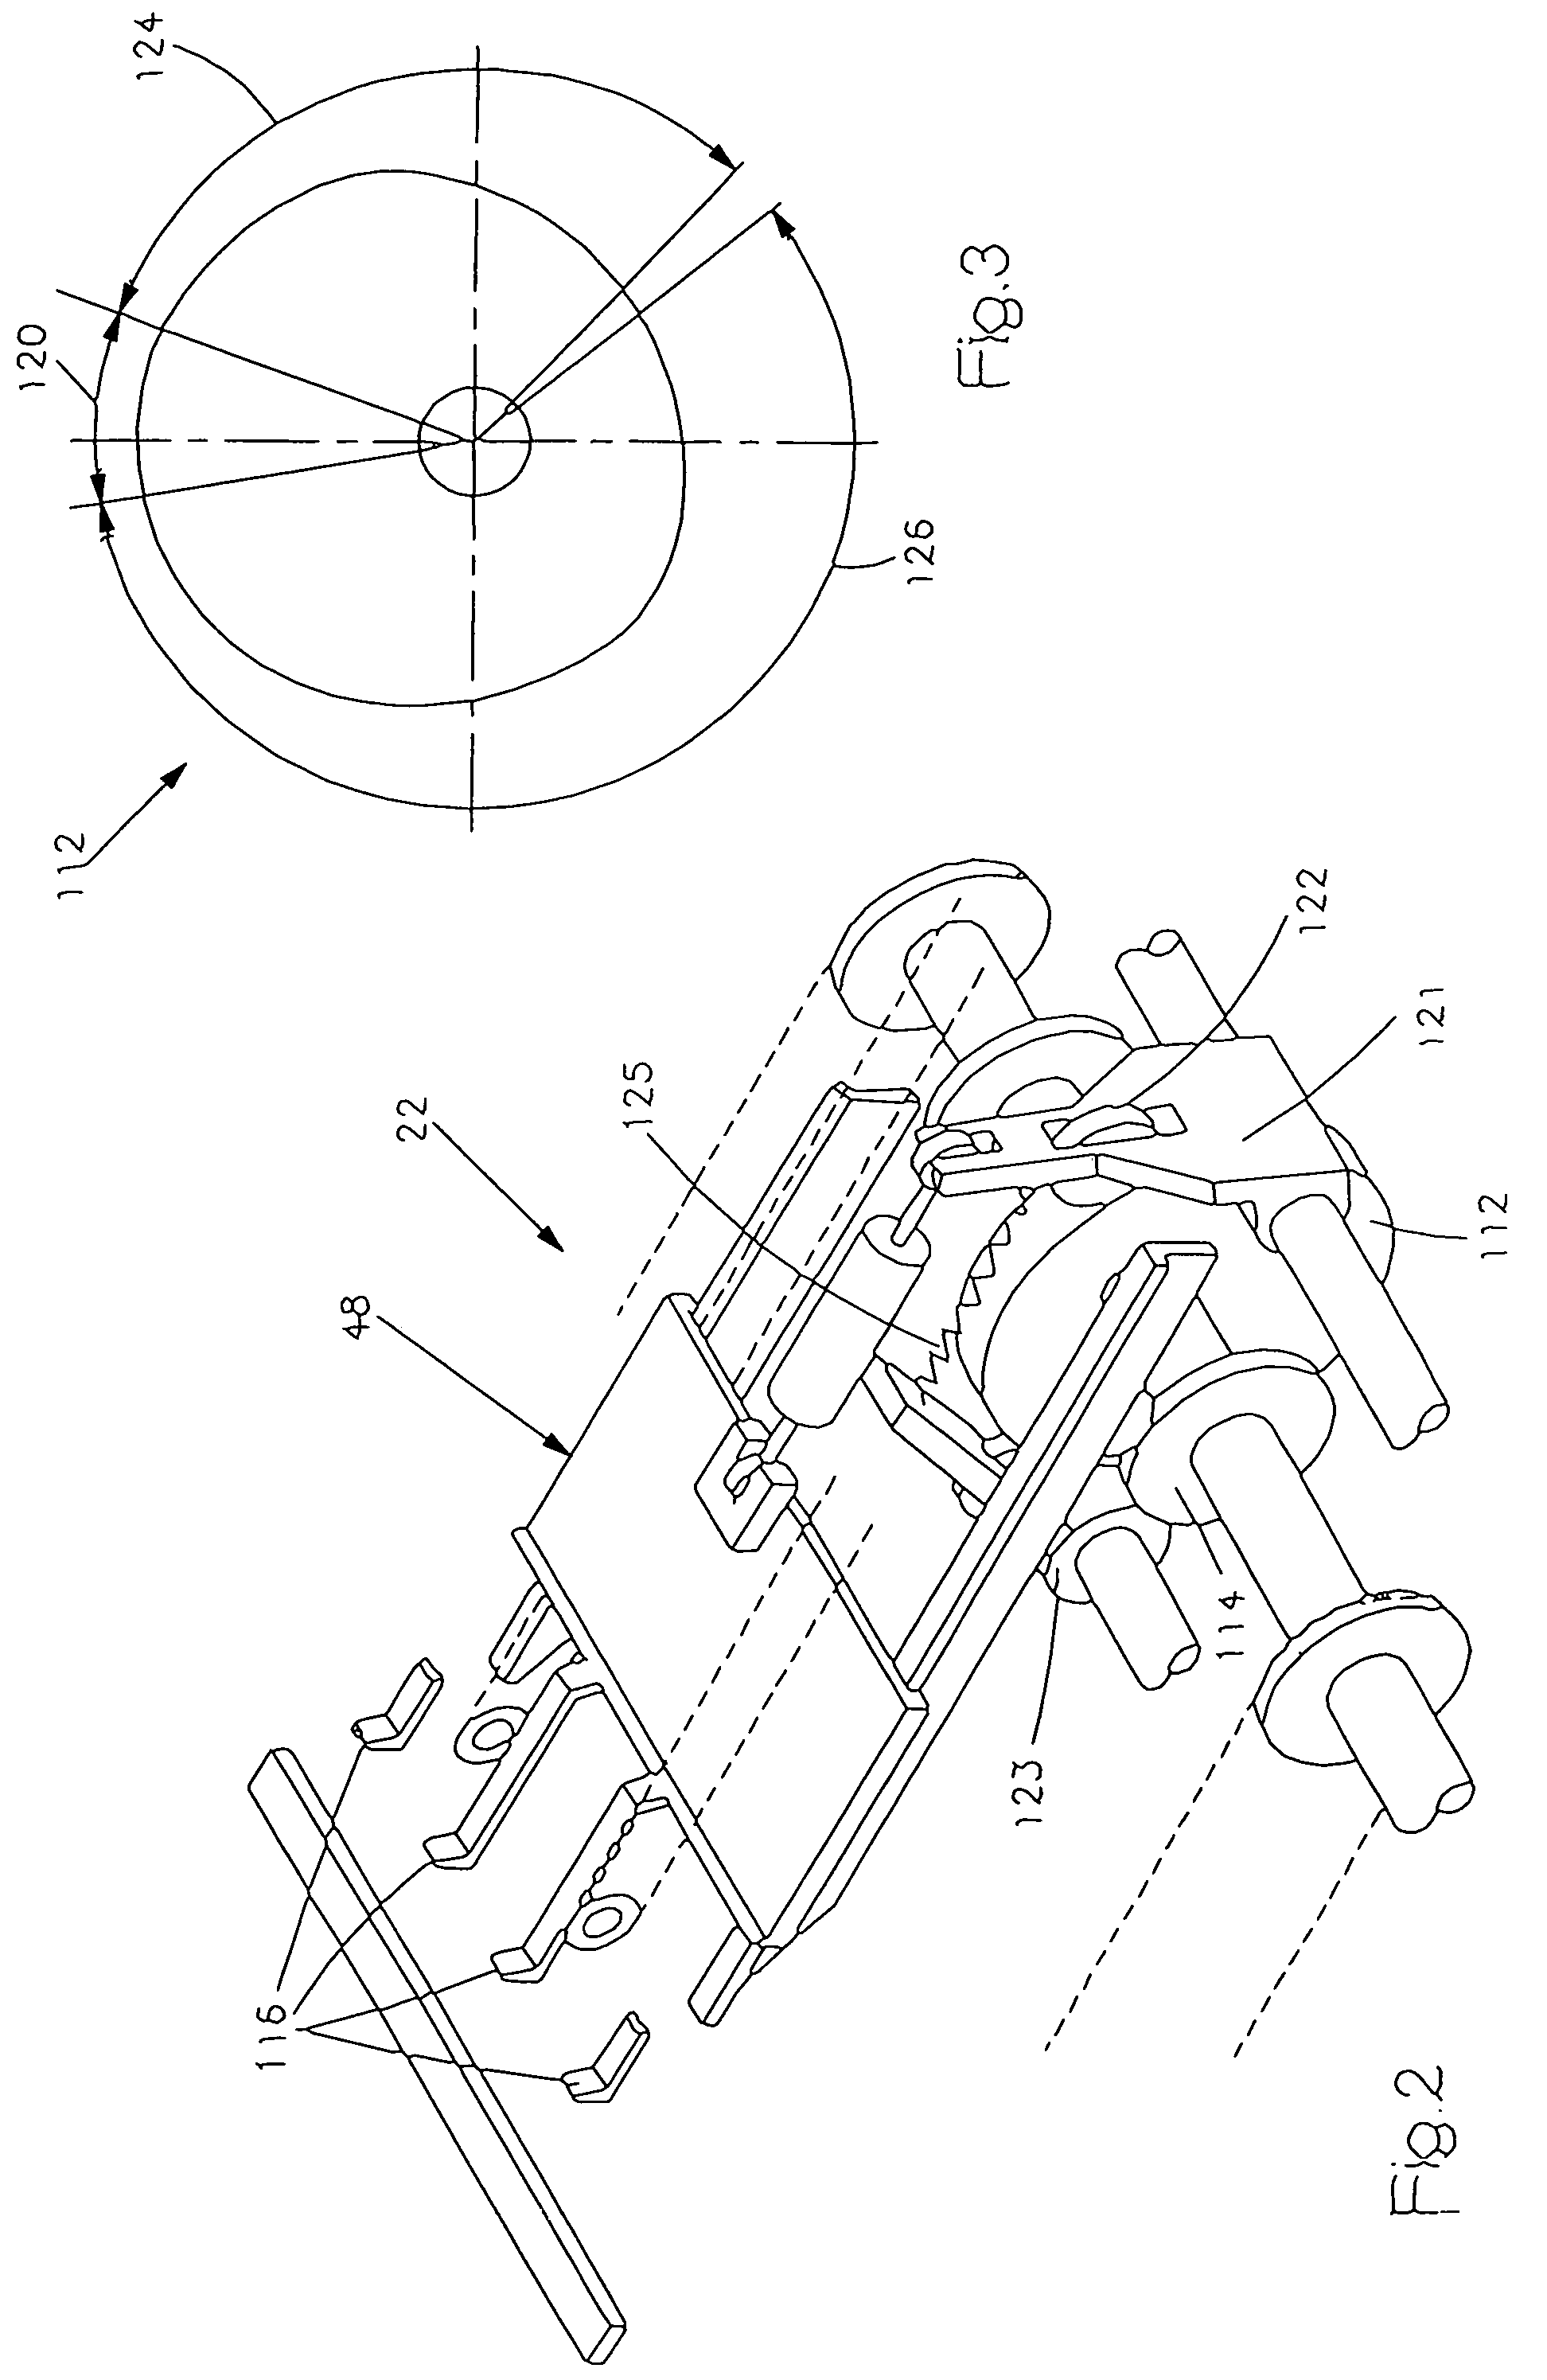 Infeed apparatus for a sheet material article trimmer